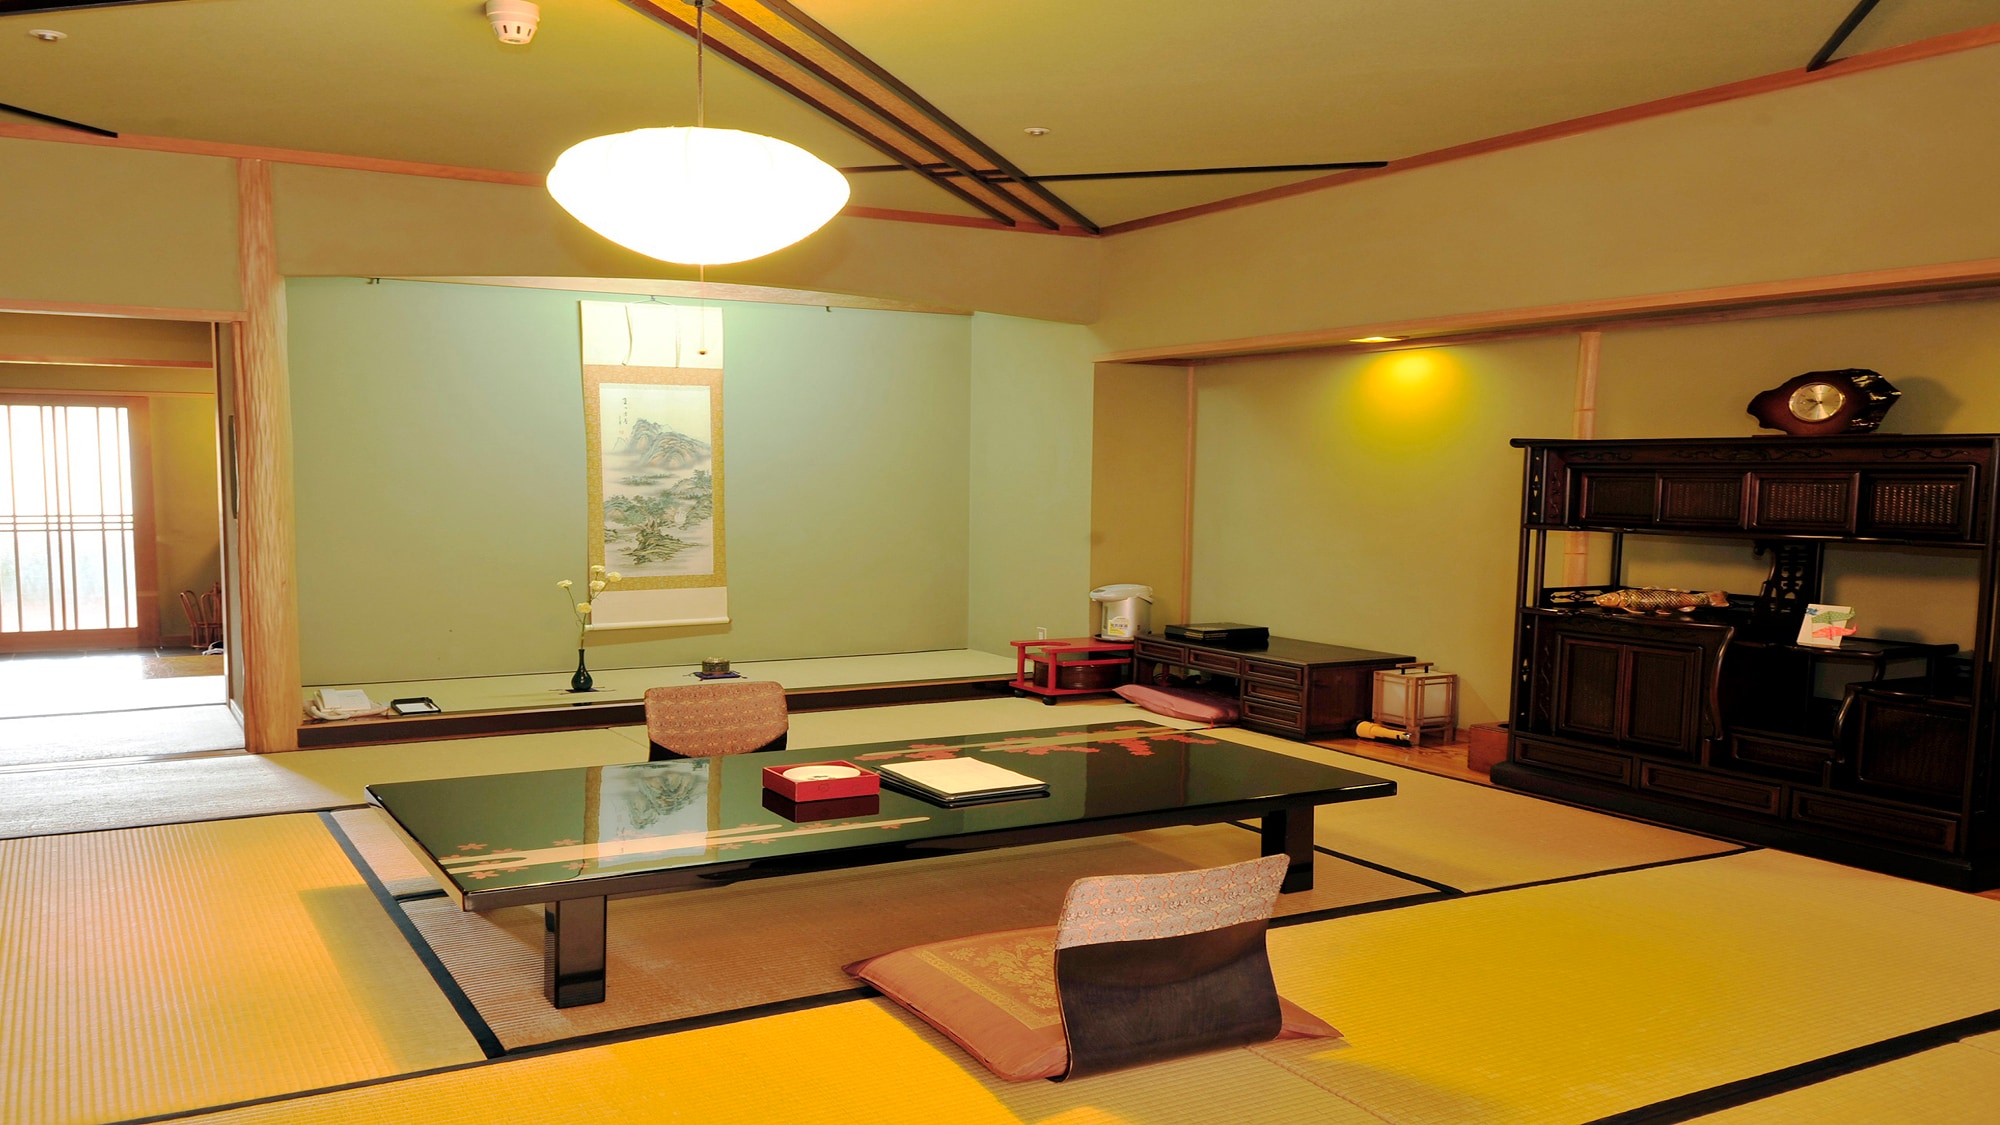 ◆ Japanese-style room (12.5 tatami mats) with wide rim